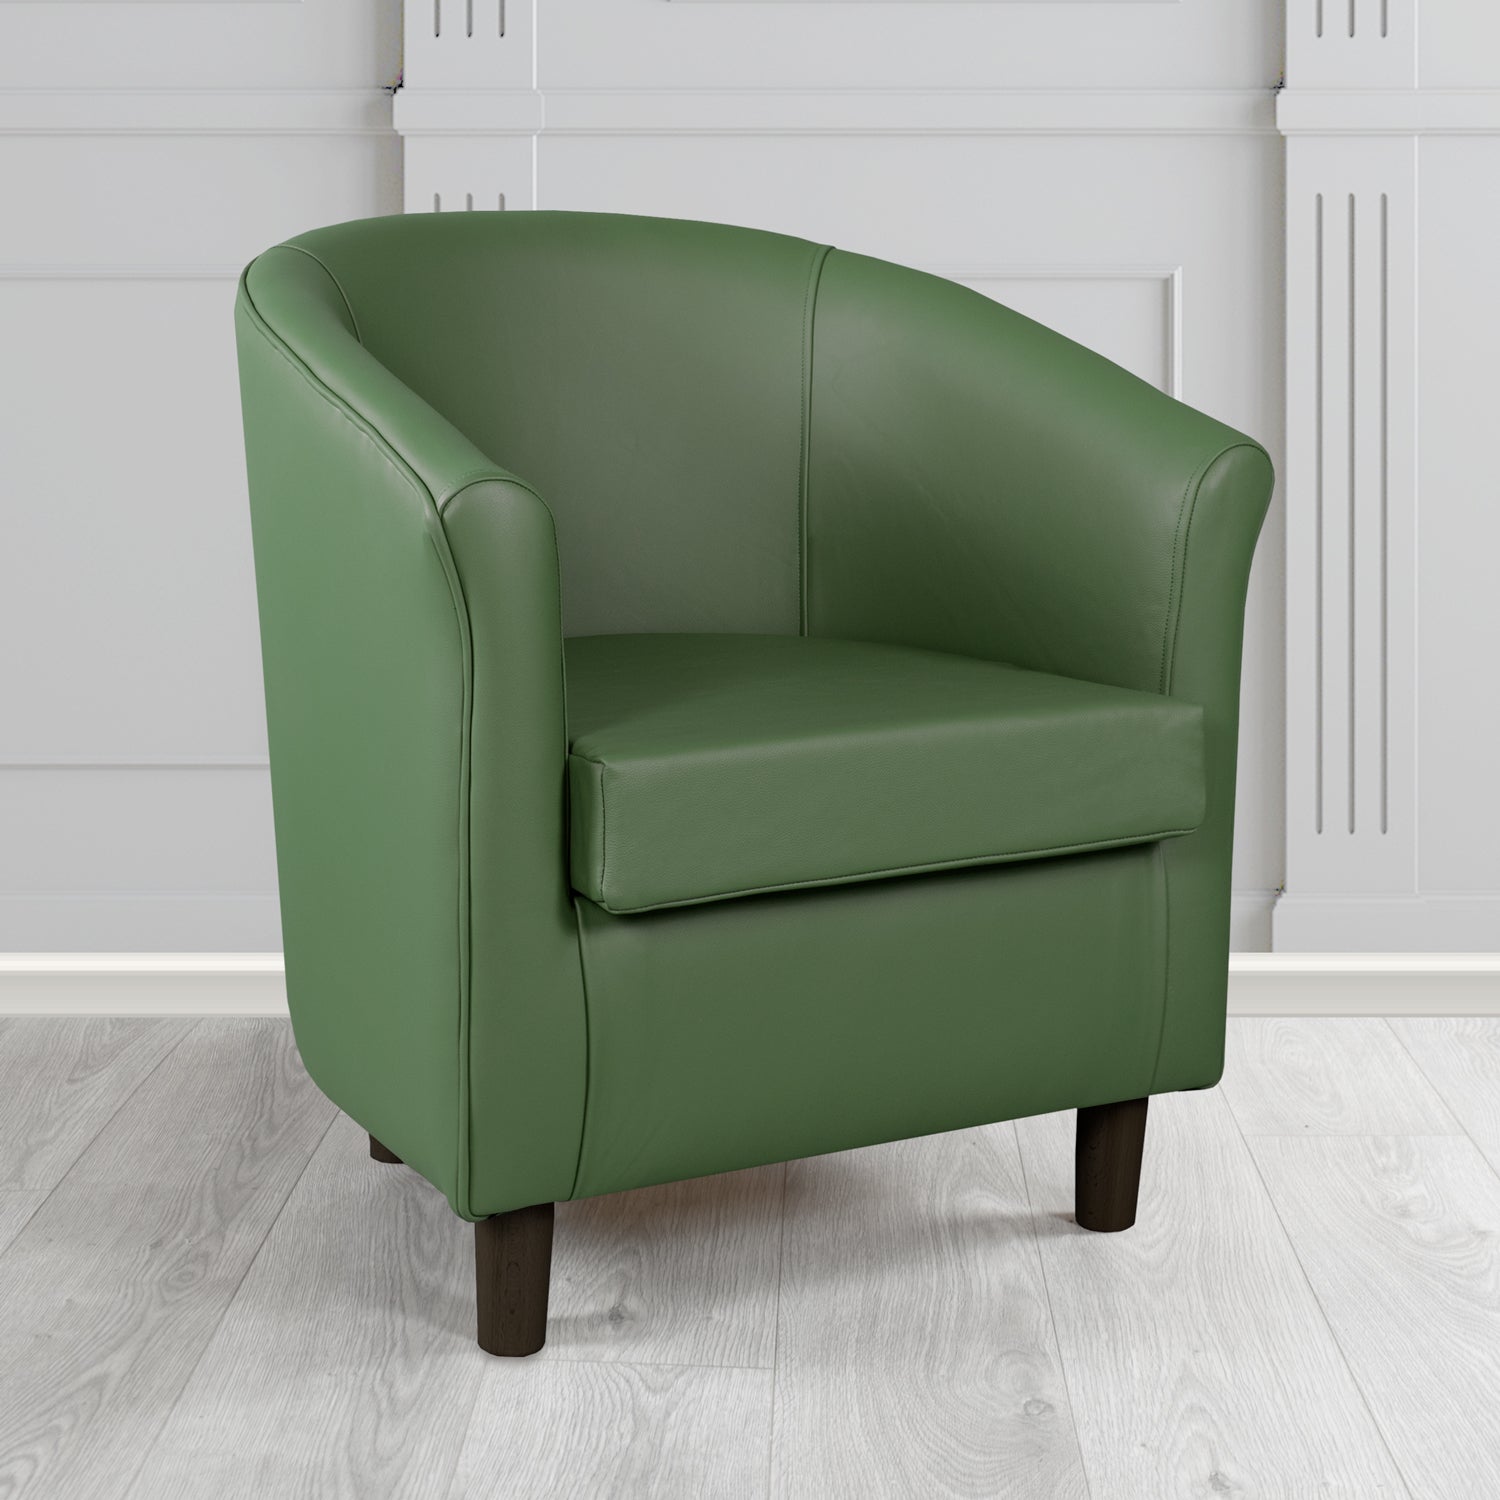 Tuscany Shelly Forest Green Crib 5 Genuine Leather Tub Chair - The Tub Chair Shop